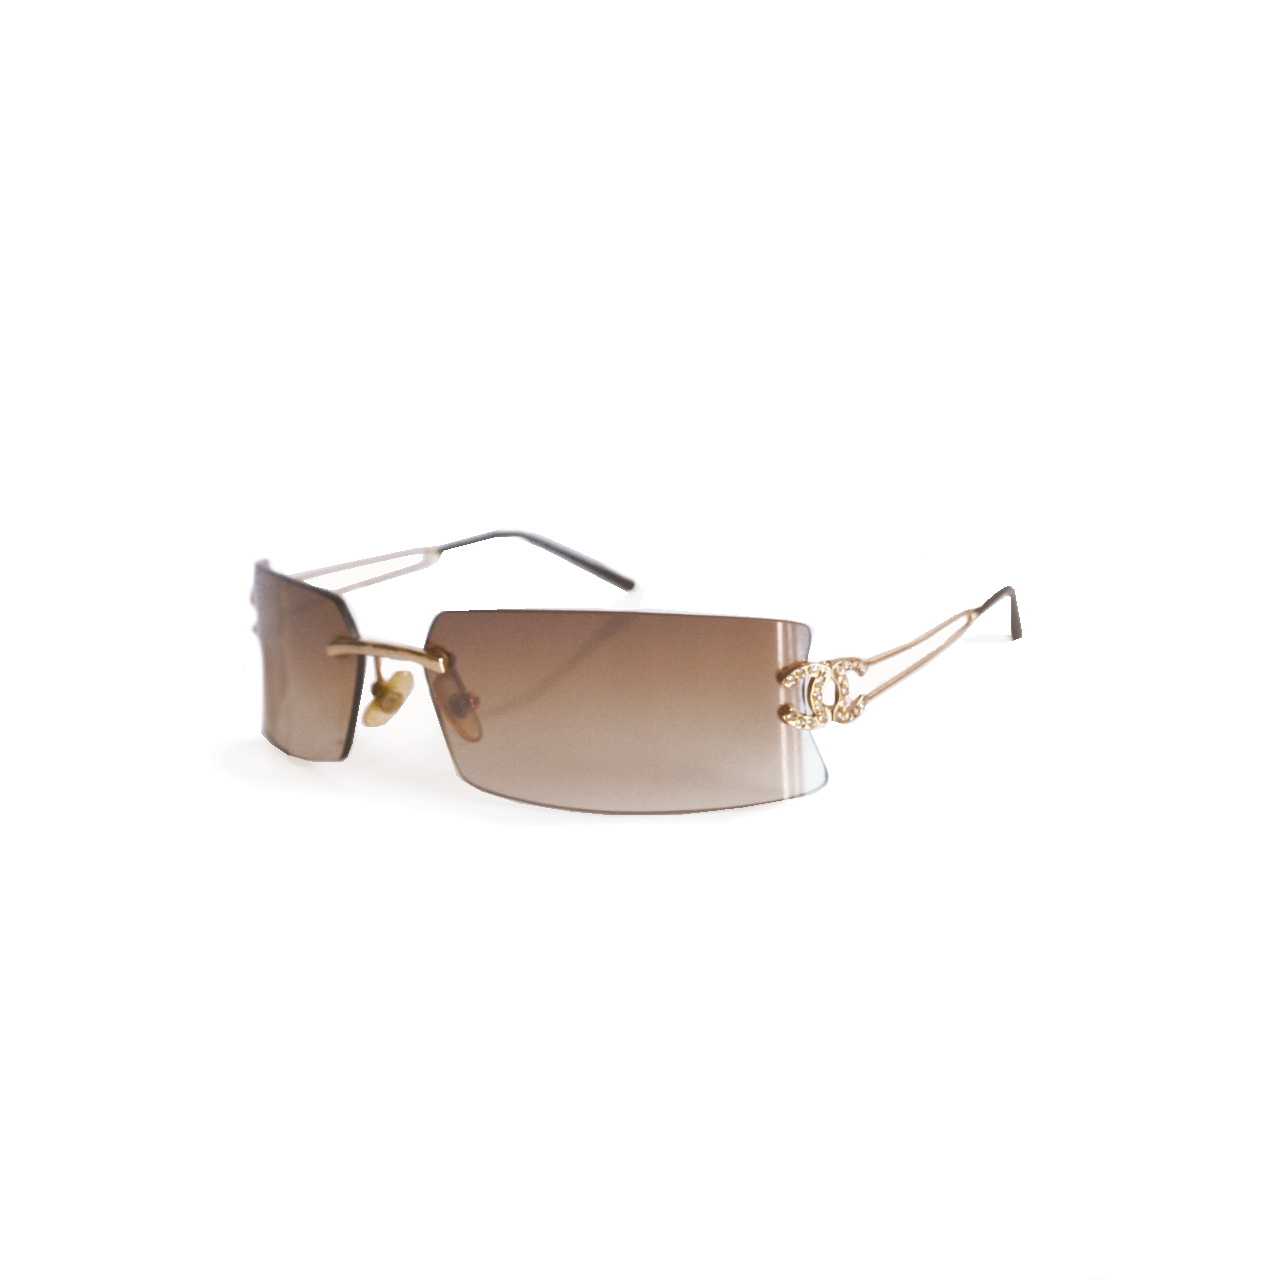 Chanel Diamante Rimless Sunglasses in Brown and Gold | Nitryl